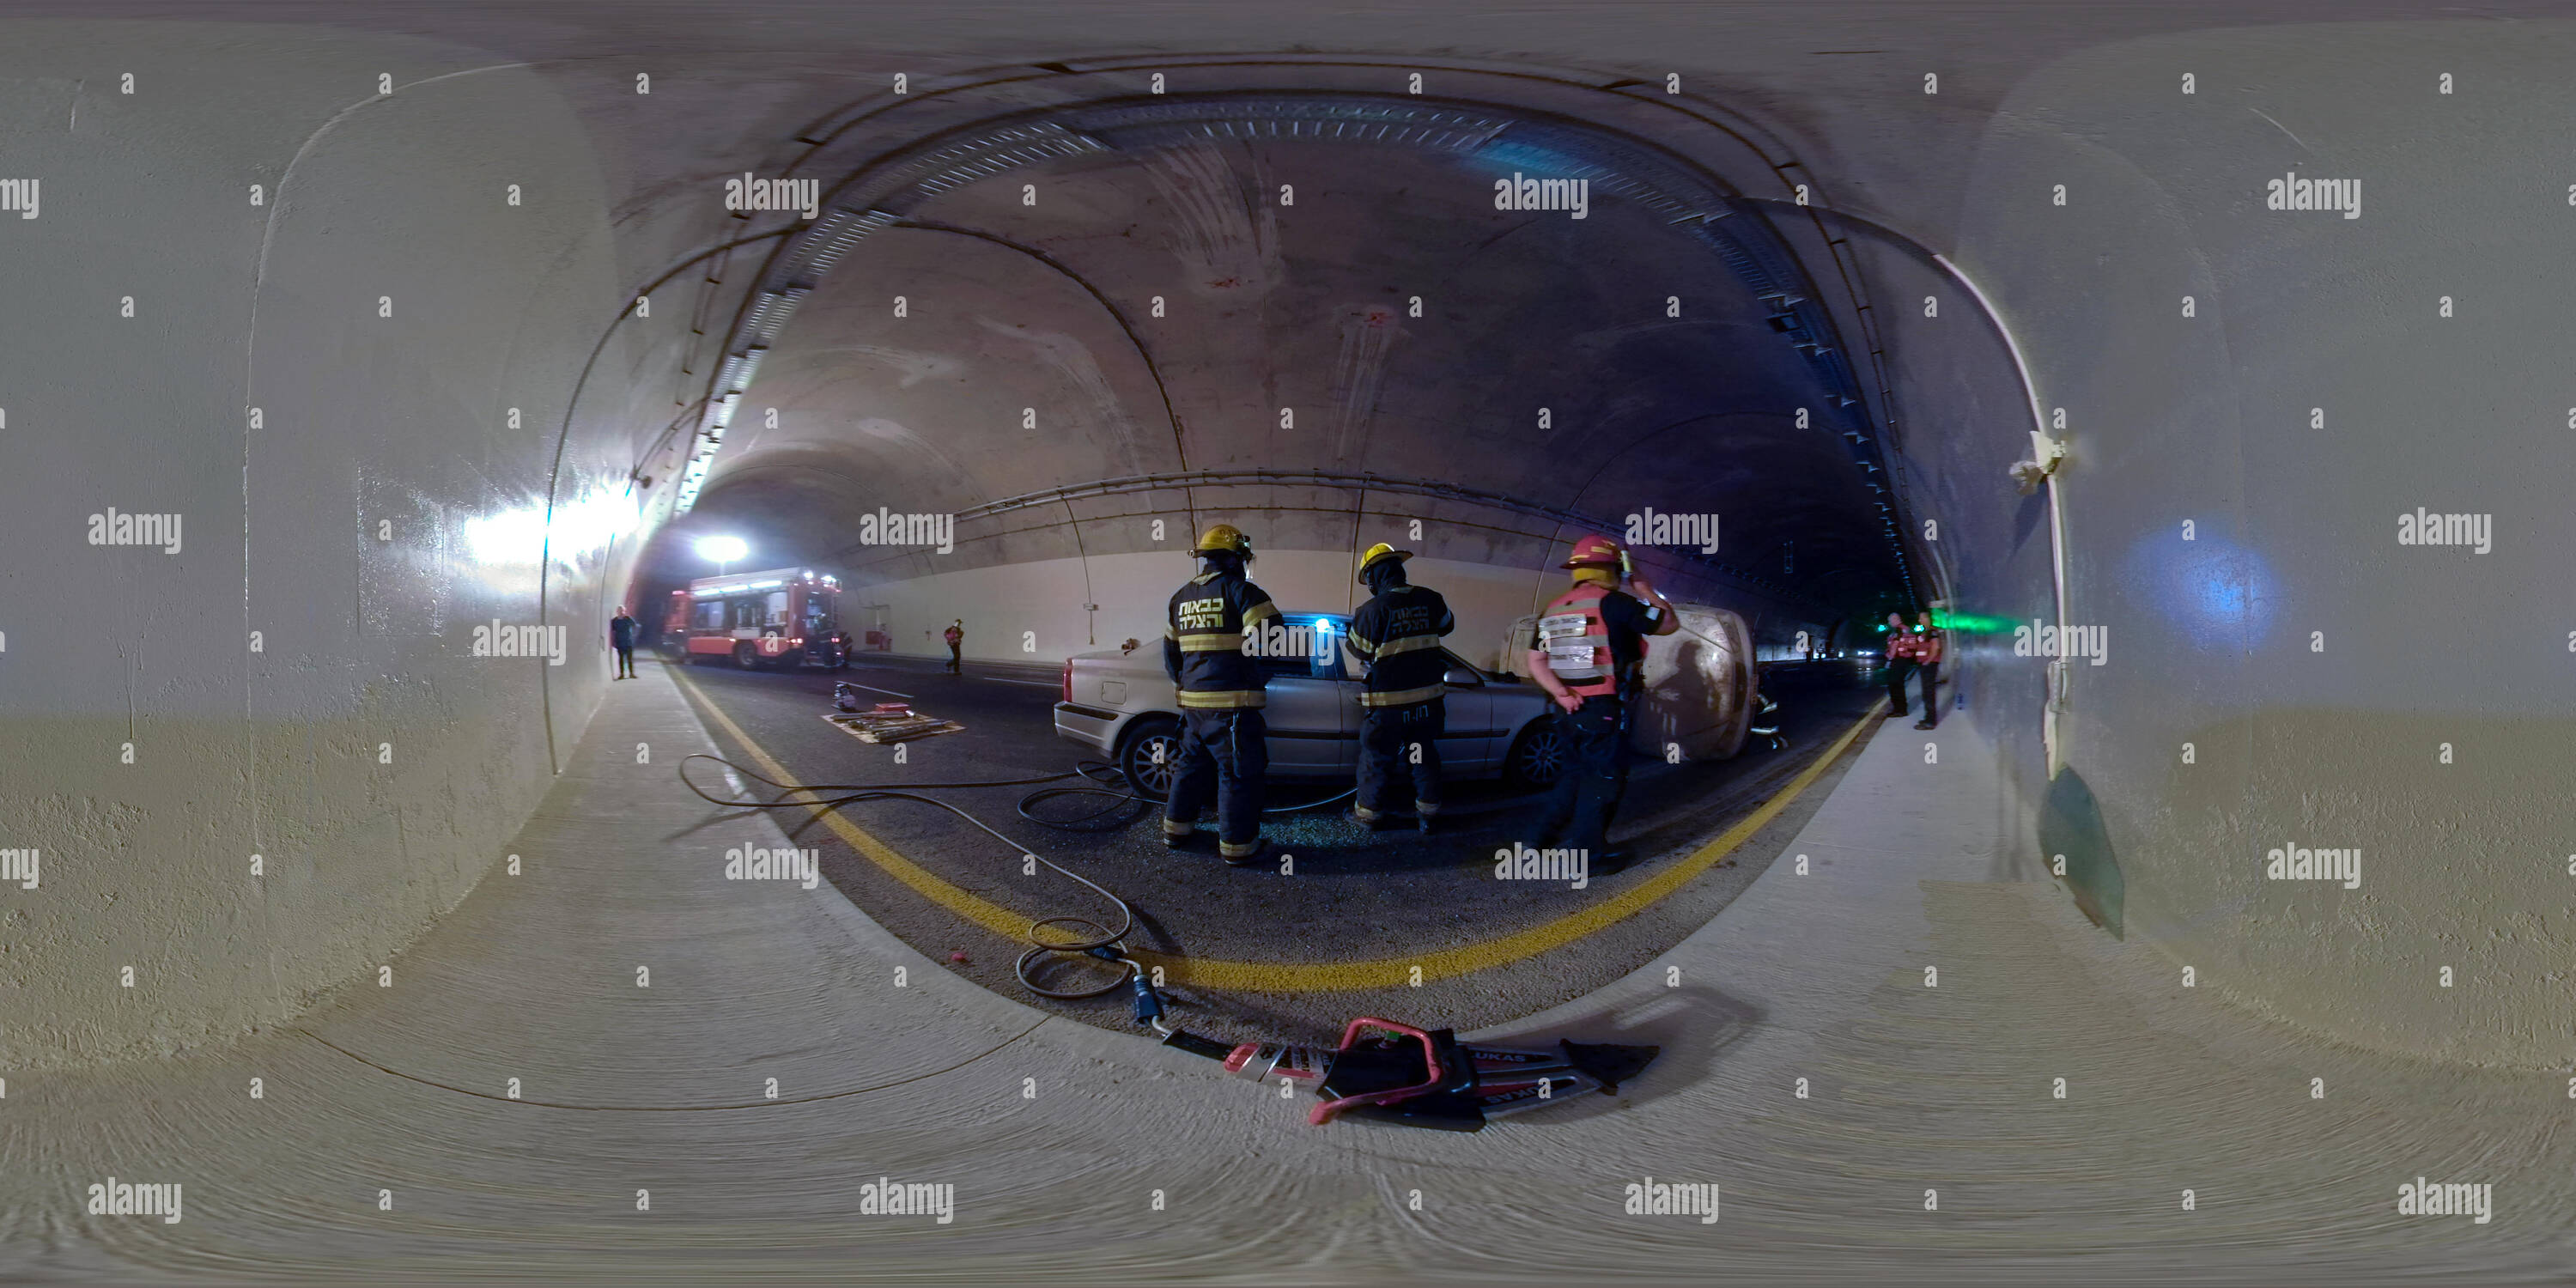 360 degree panoramic view of Firefighters disassemble a car window in car accident during a drill in Kashish Tunnels, Road 6, Israel. 360 photo vr panorama 2:1 aspect ratio for VR